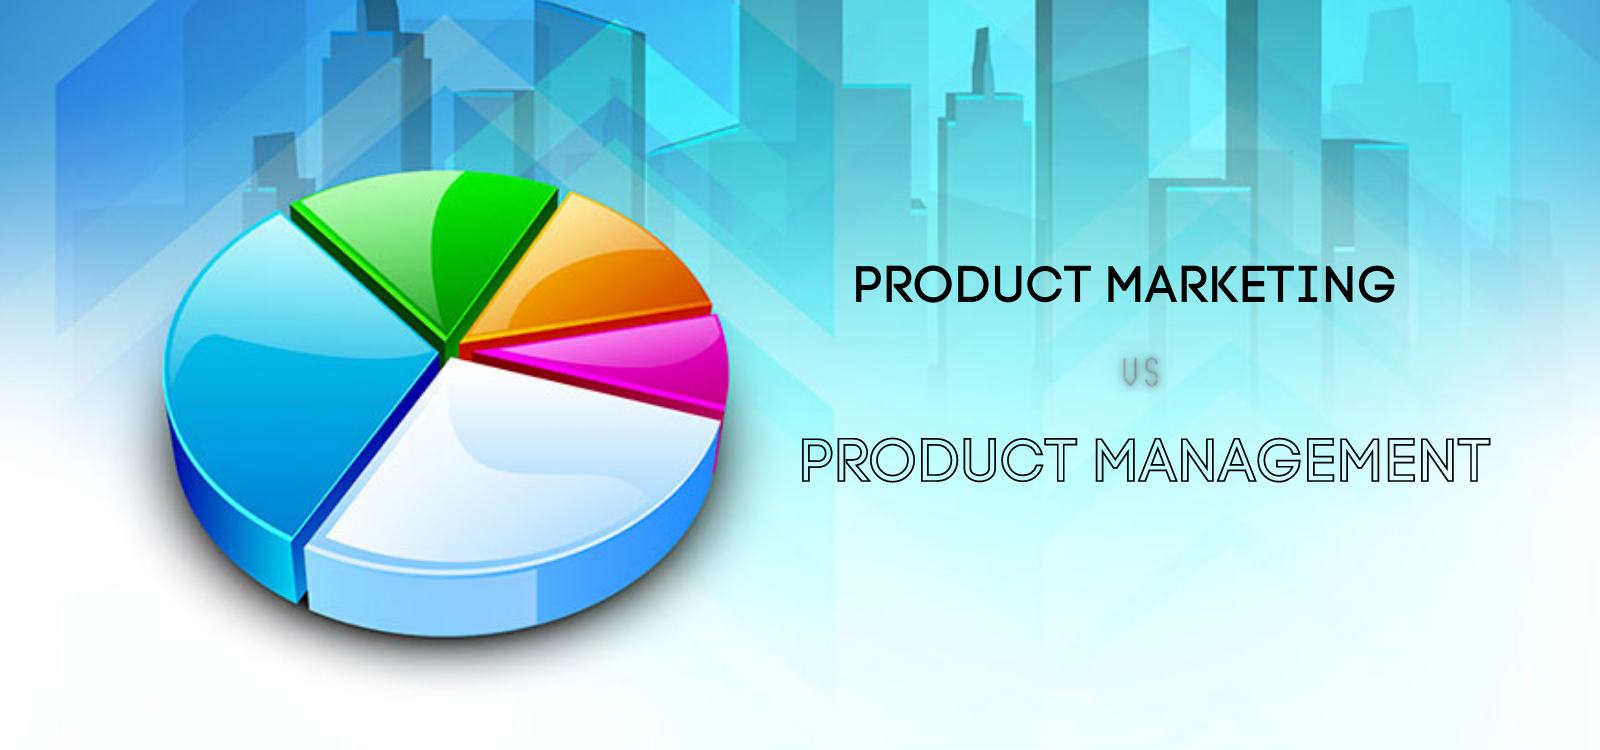 Understanding the Differences between Product Marketing vs Product Management